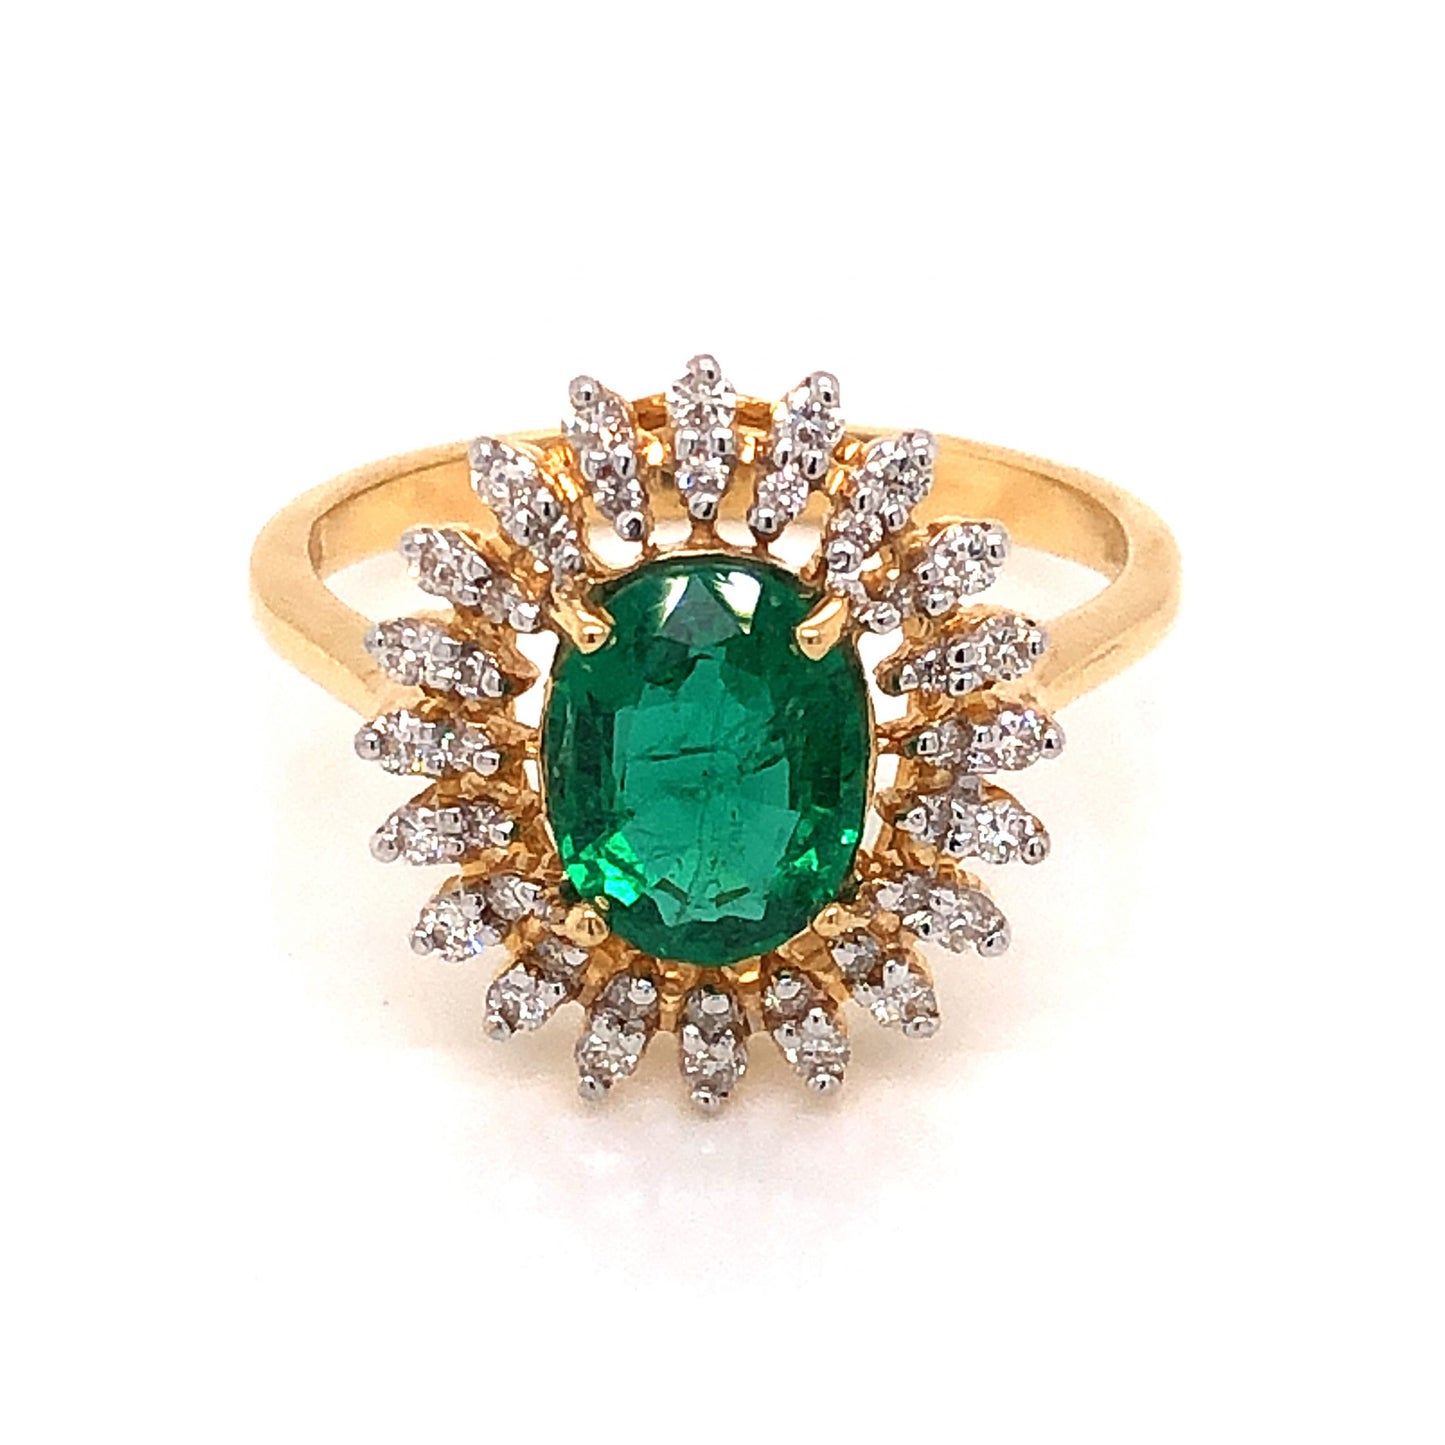 .93 Oval Cut Emerald & Diamond Cocktail Ring in 18k Yellow Gold